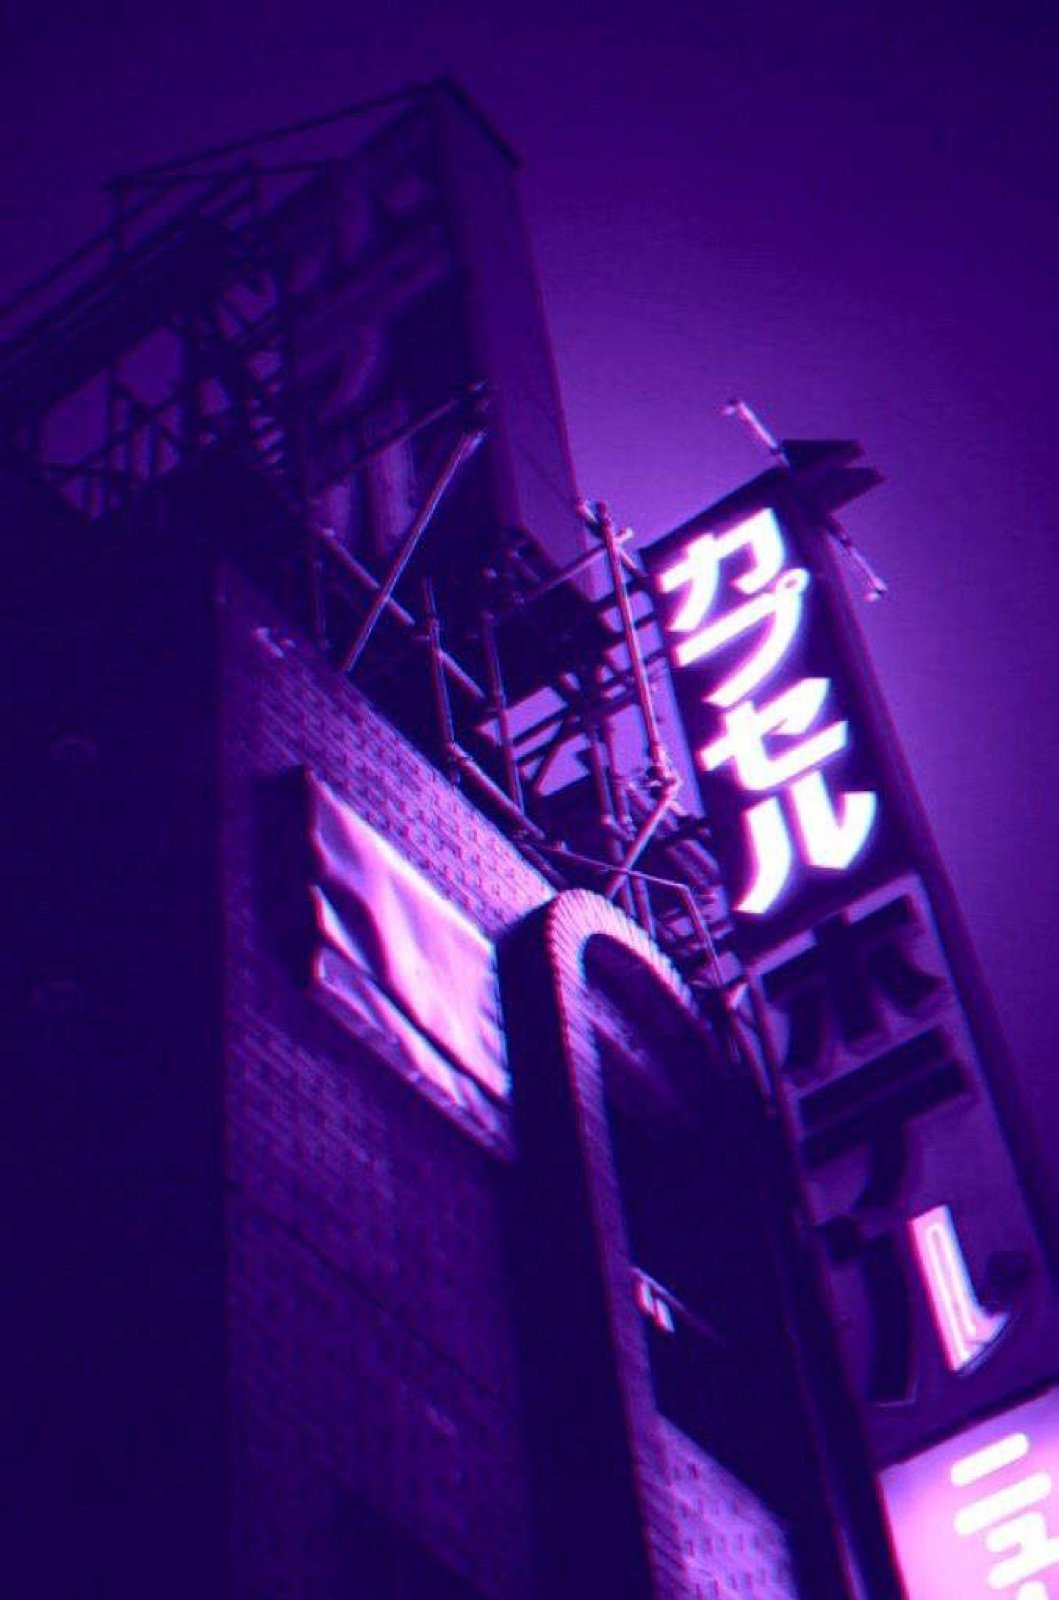 Aesthetic Spotify Playlist Picture 300X300 / Grunge Aesthetic Anime Spotify Playlist Covers Novocom Top / See more ideas about spotify playlist, aesthetic colors, aesthetic